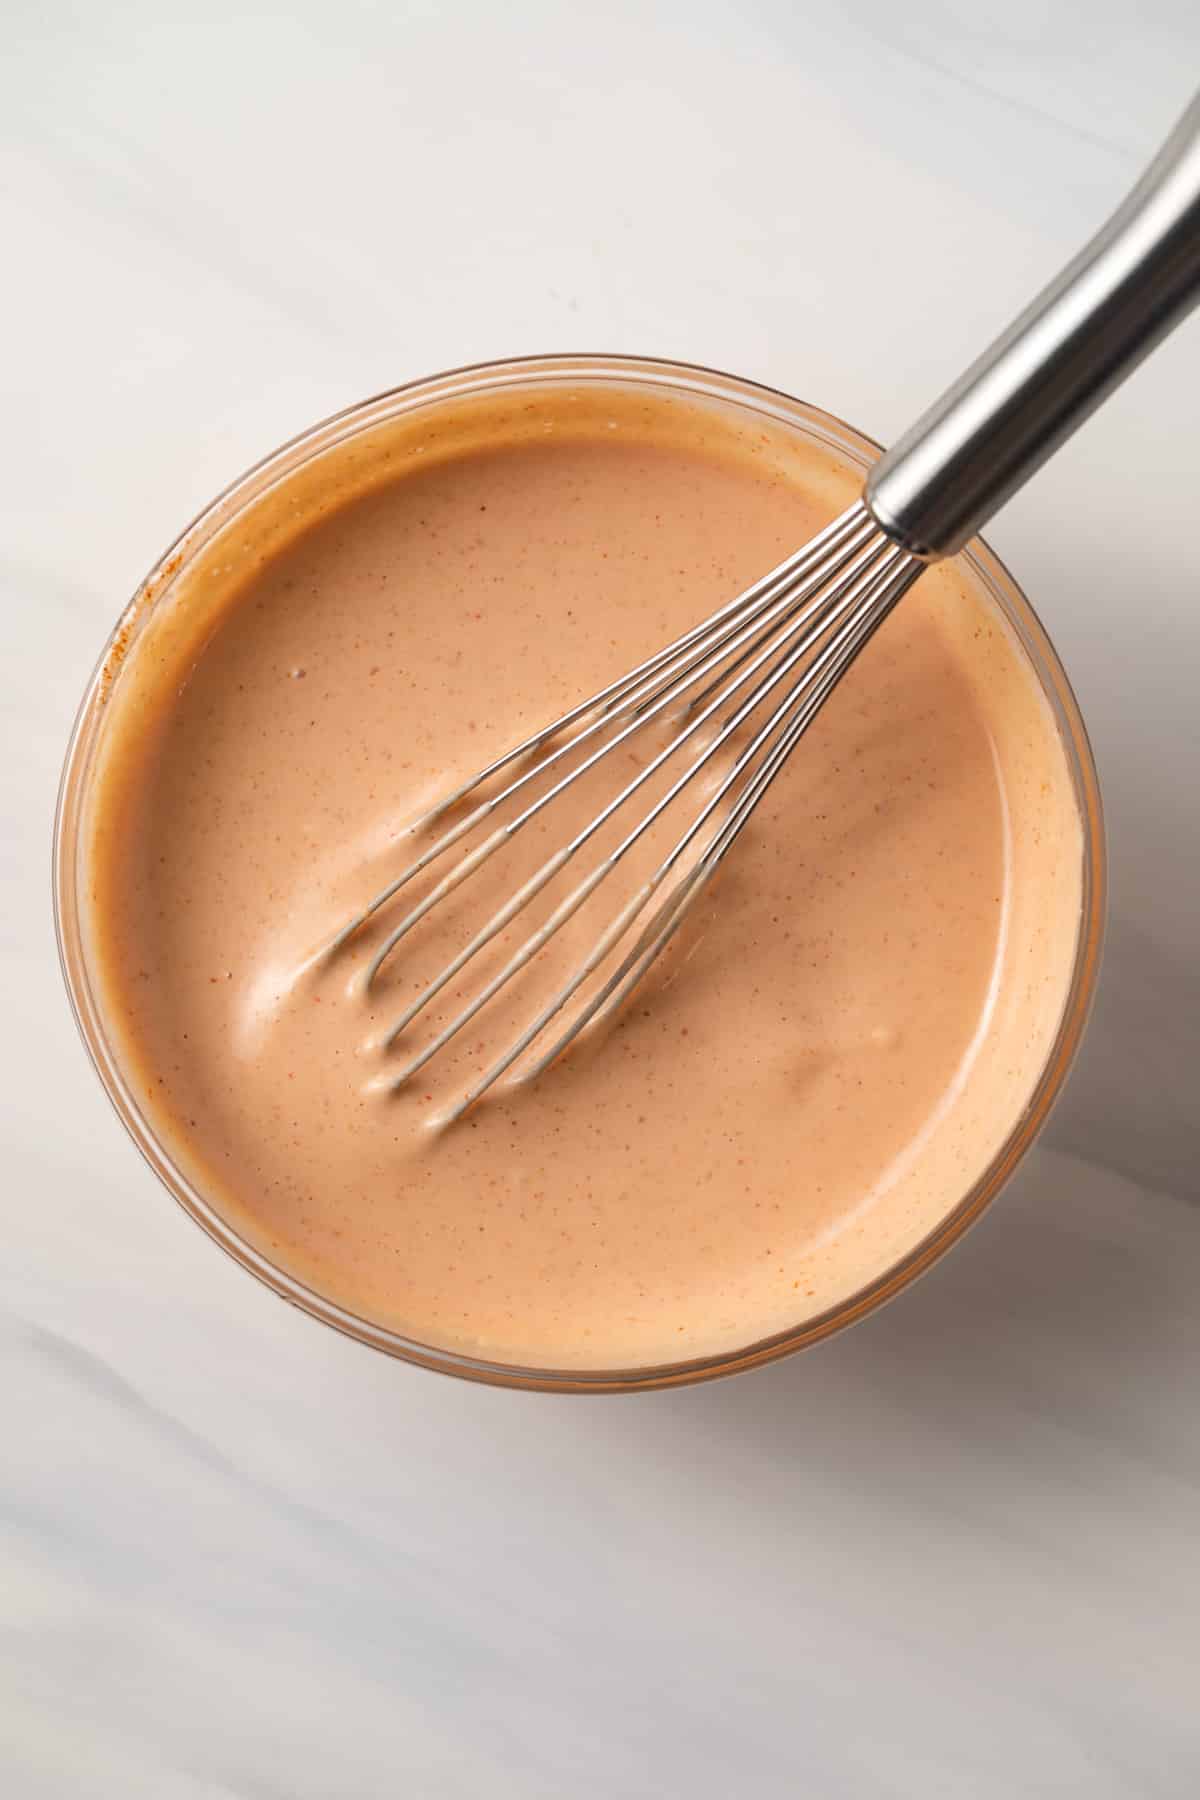 Comeback sauce in a glass bowl with whisk.